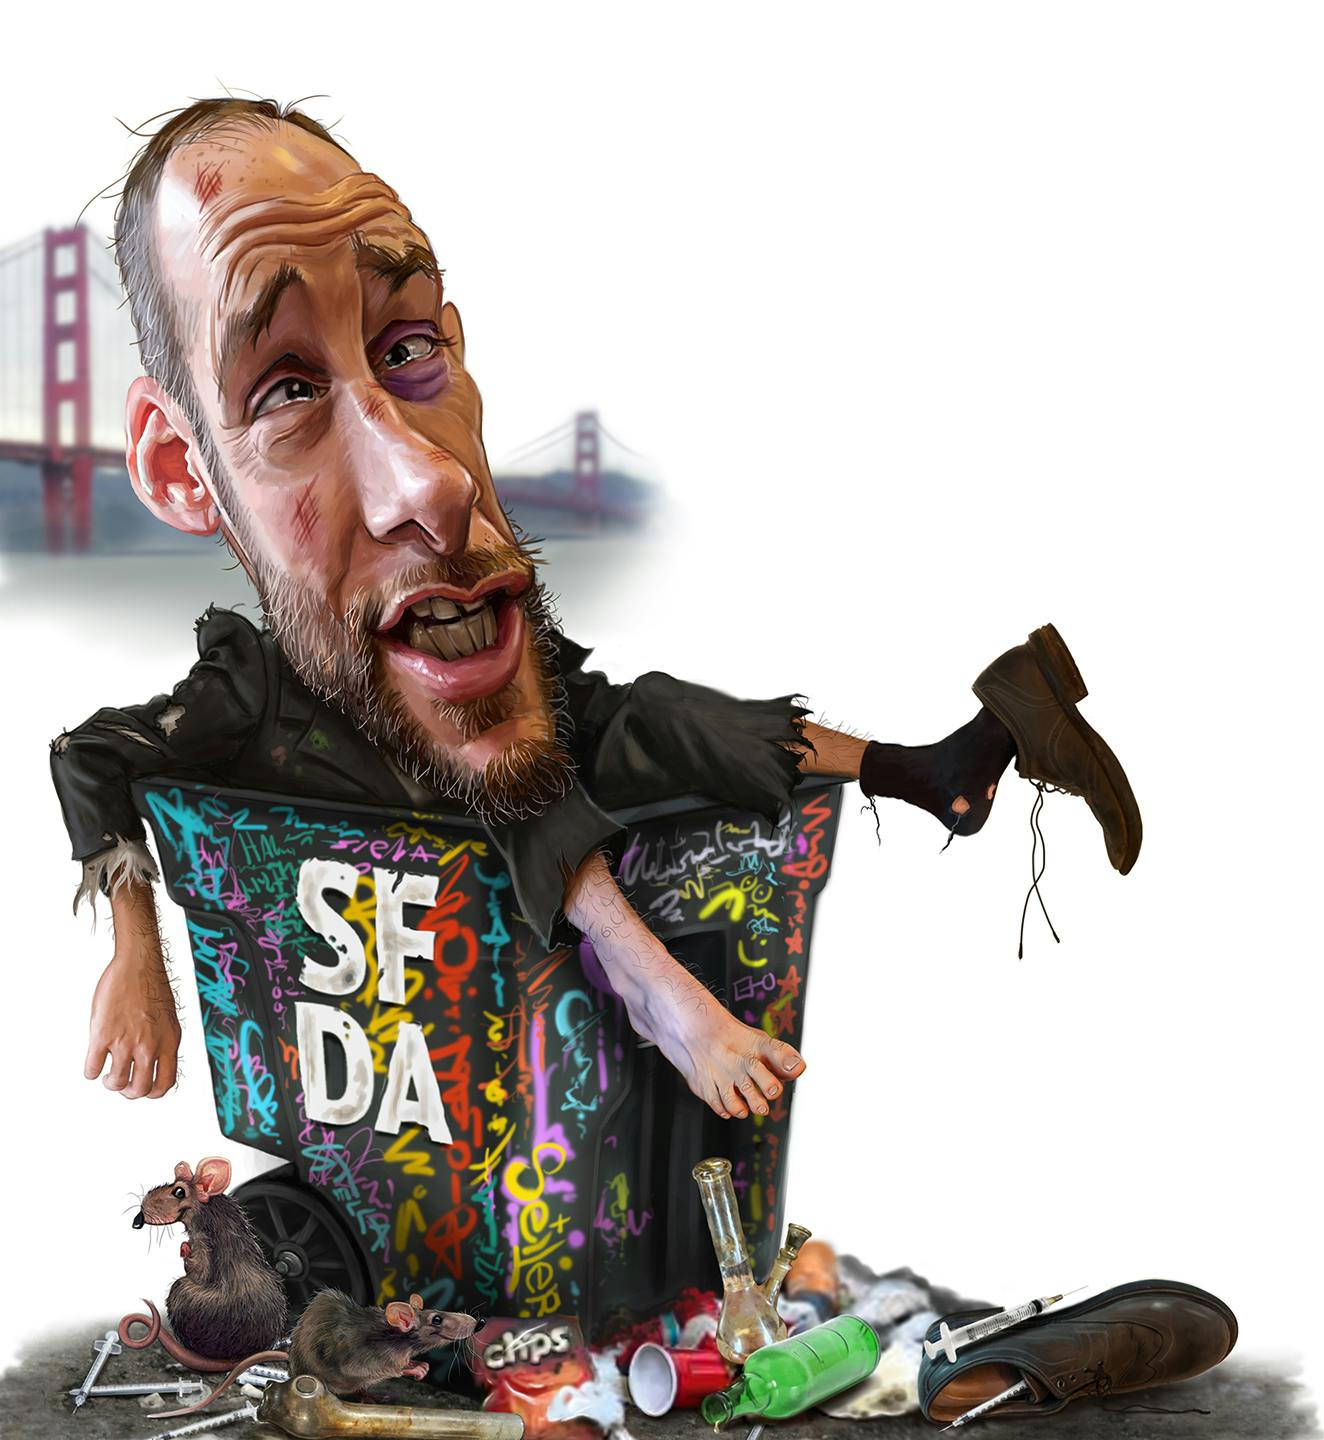 Caricature of a homeless man